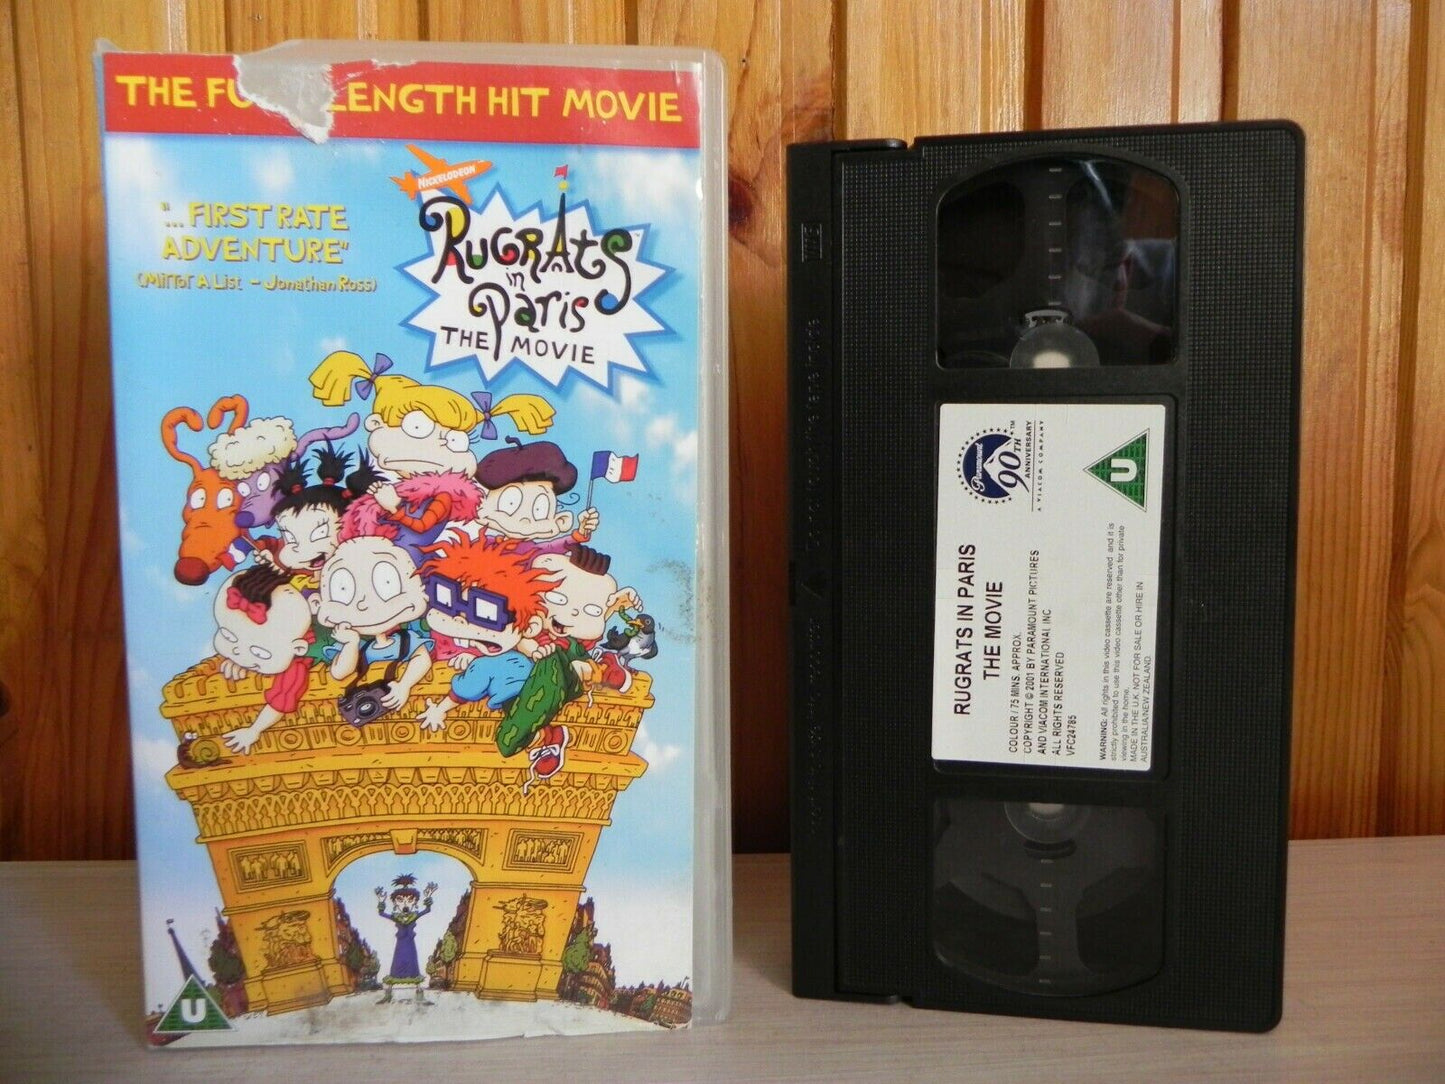 Rugrats In Paris: The Movie - Paramount - The Full Length Hit Movie - Pal VHS-